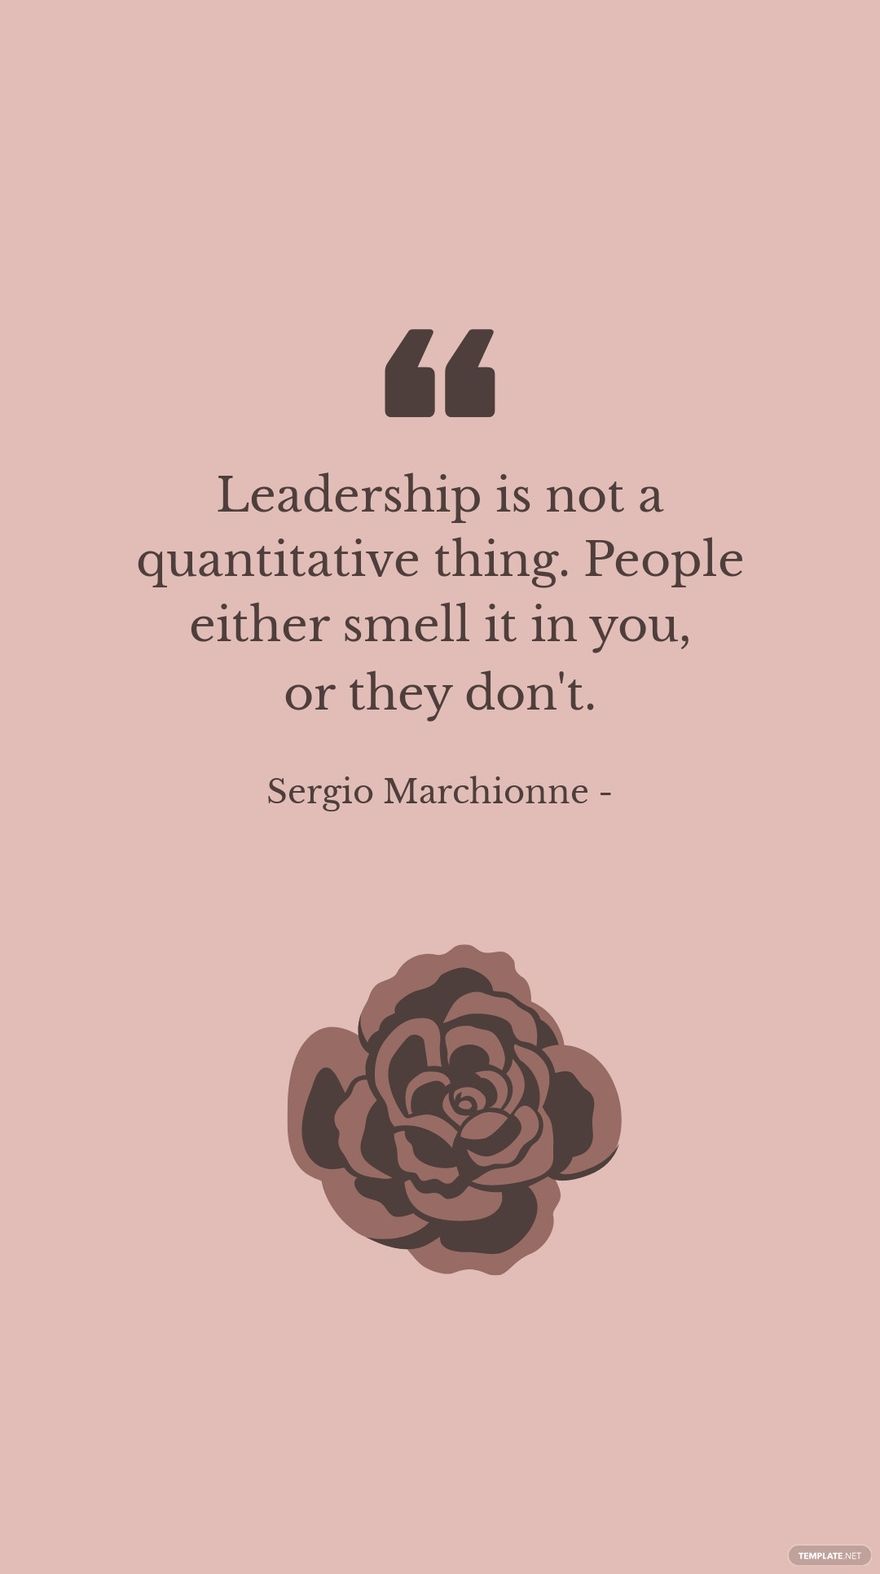 Sergio Marchionne - Leadership is not a quantitative thing. People either smell it in you, or they don't.